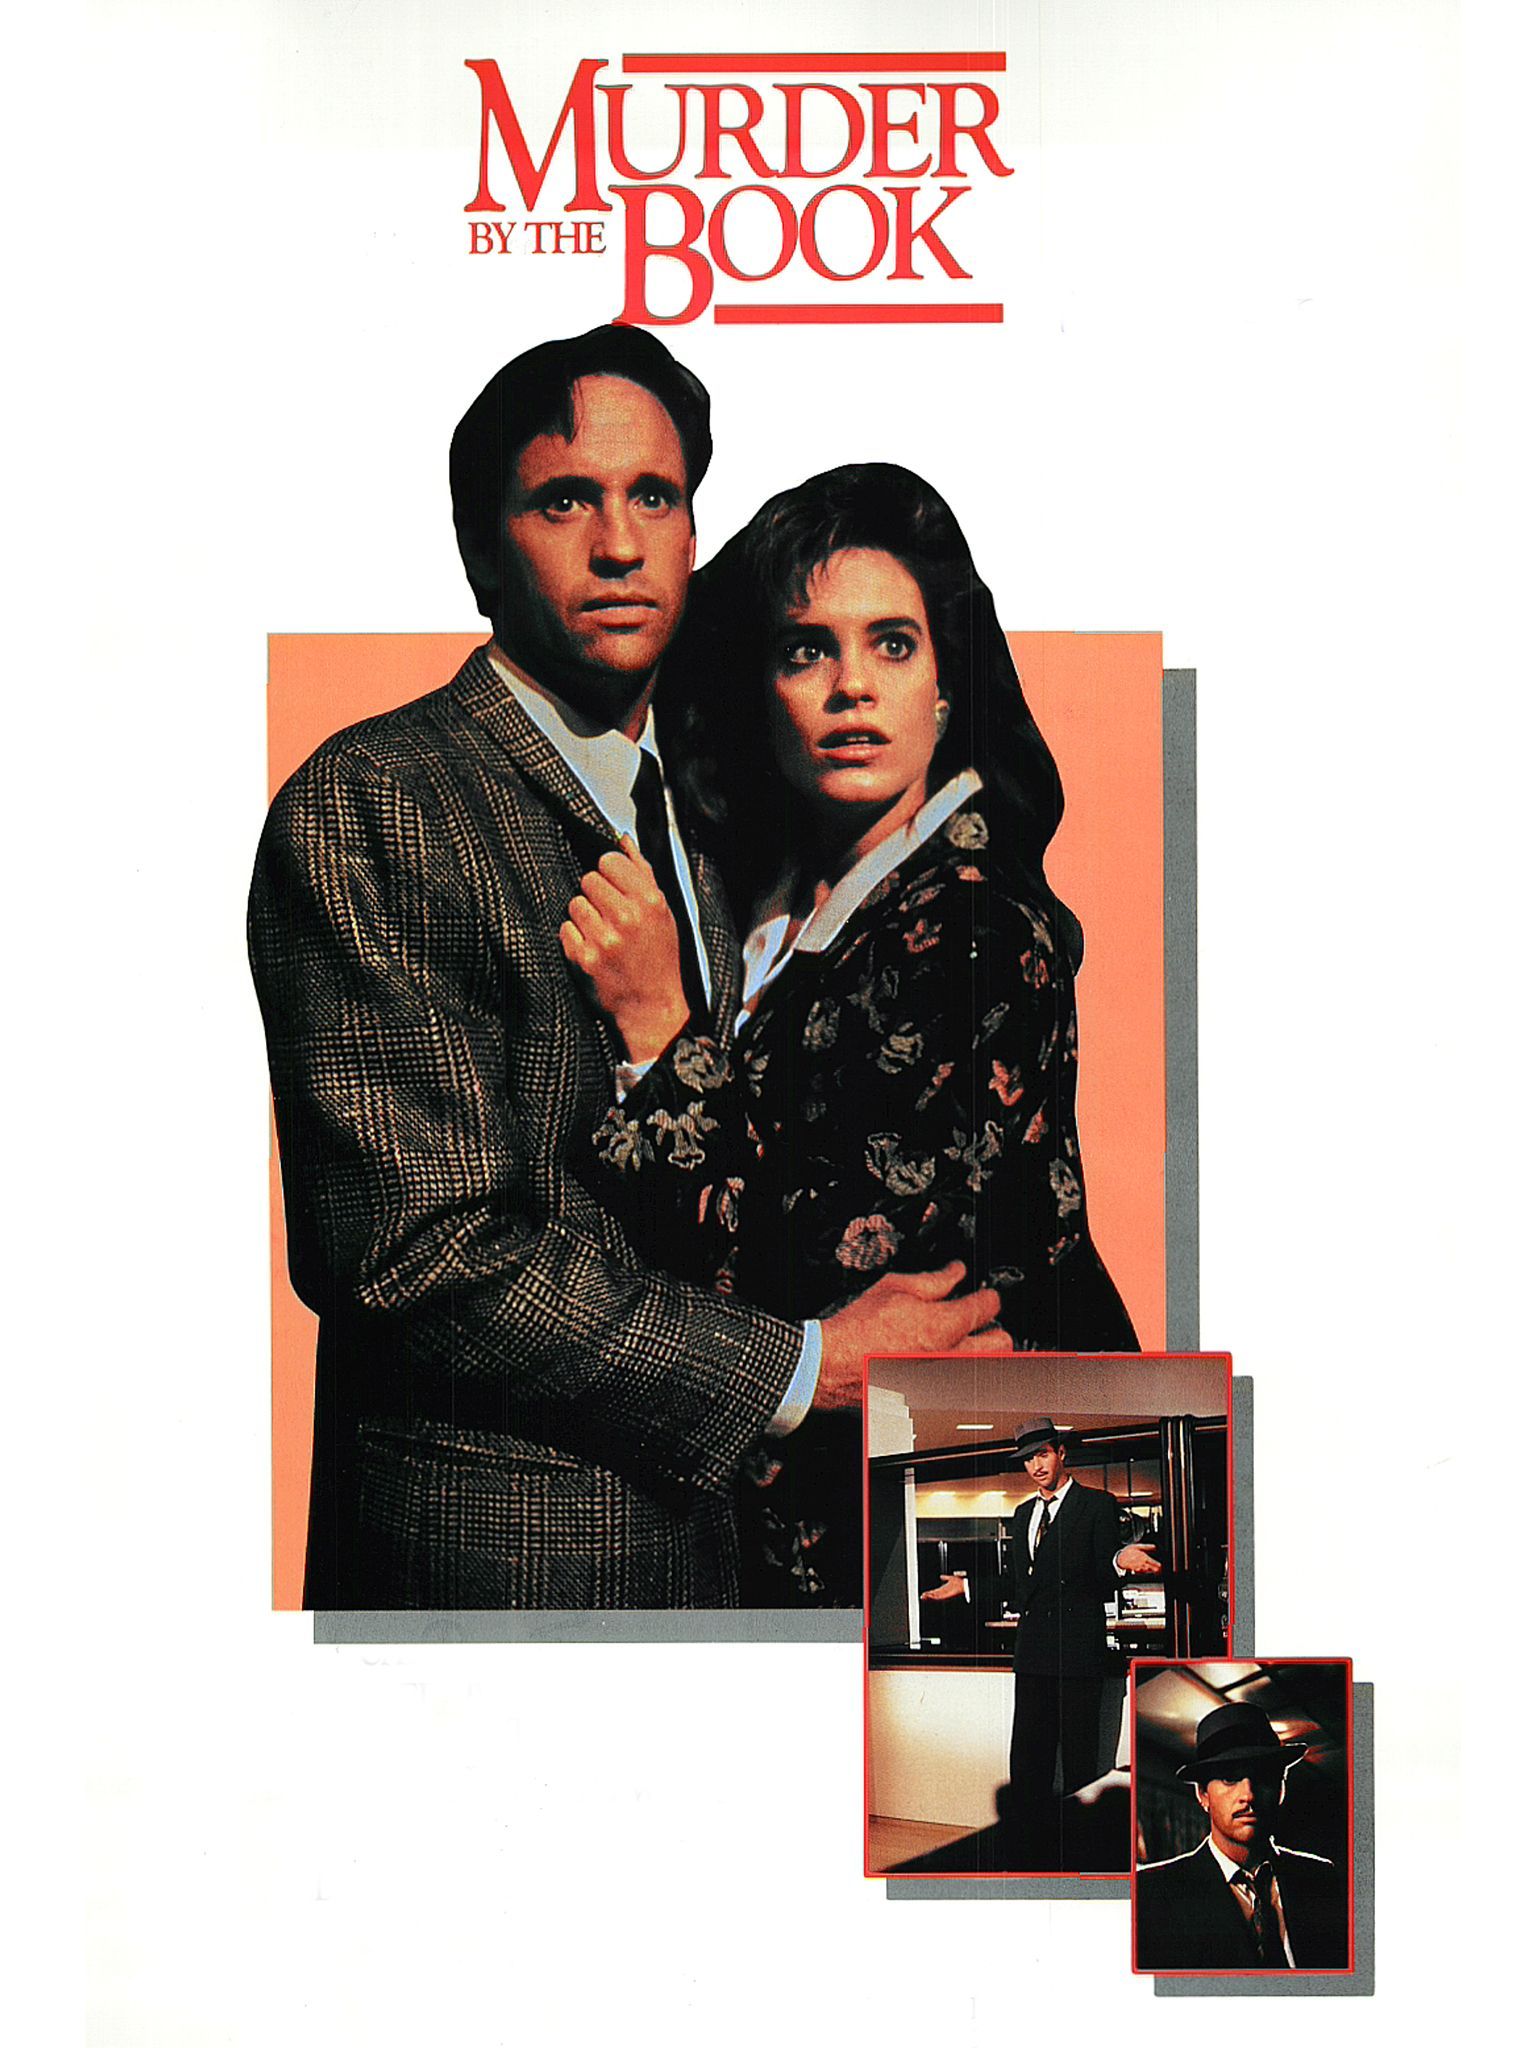 Promotional image for 1987's Murder By the Book